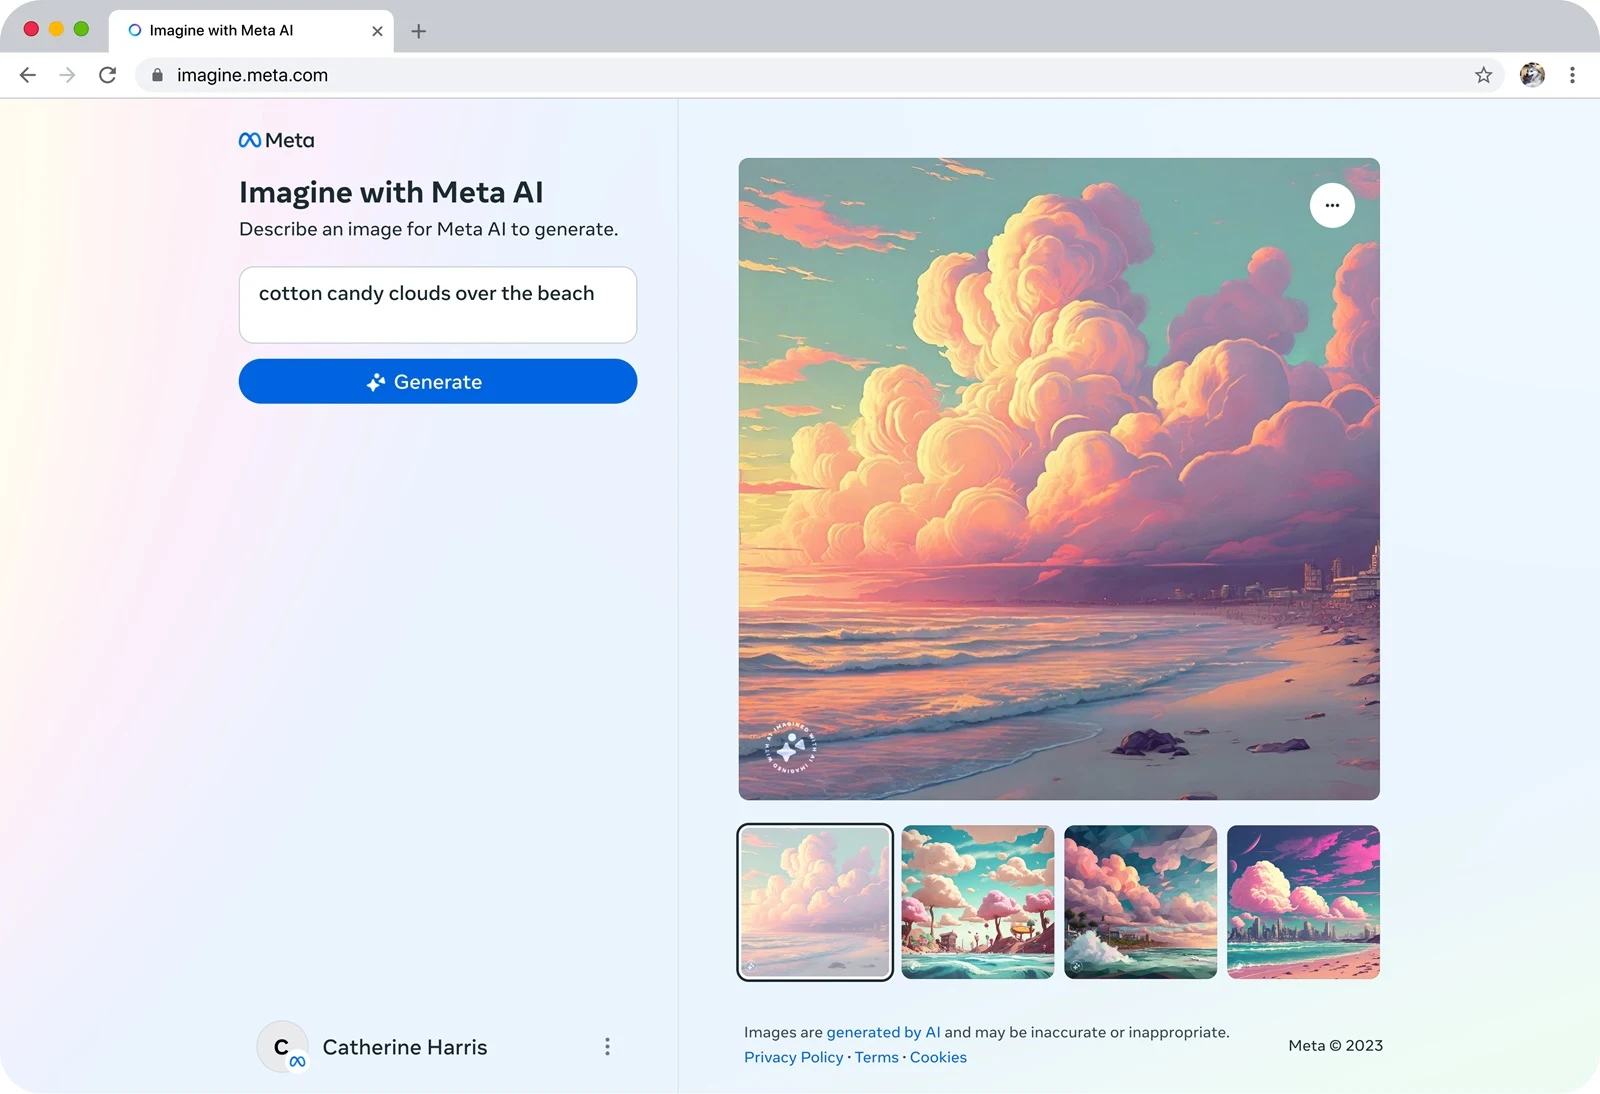 Meta's Imagine Image Generator, previously limited, is now accessible on the web for creative graphic production.